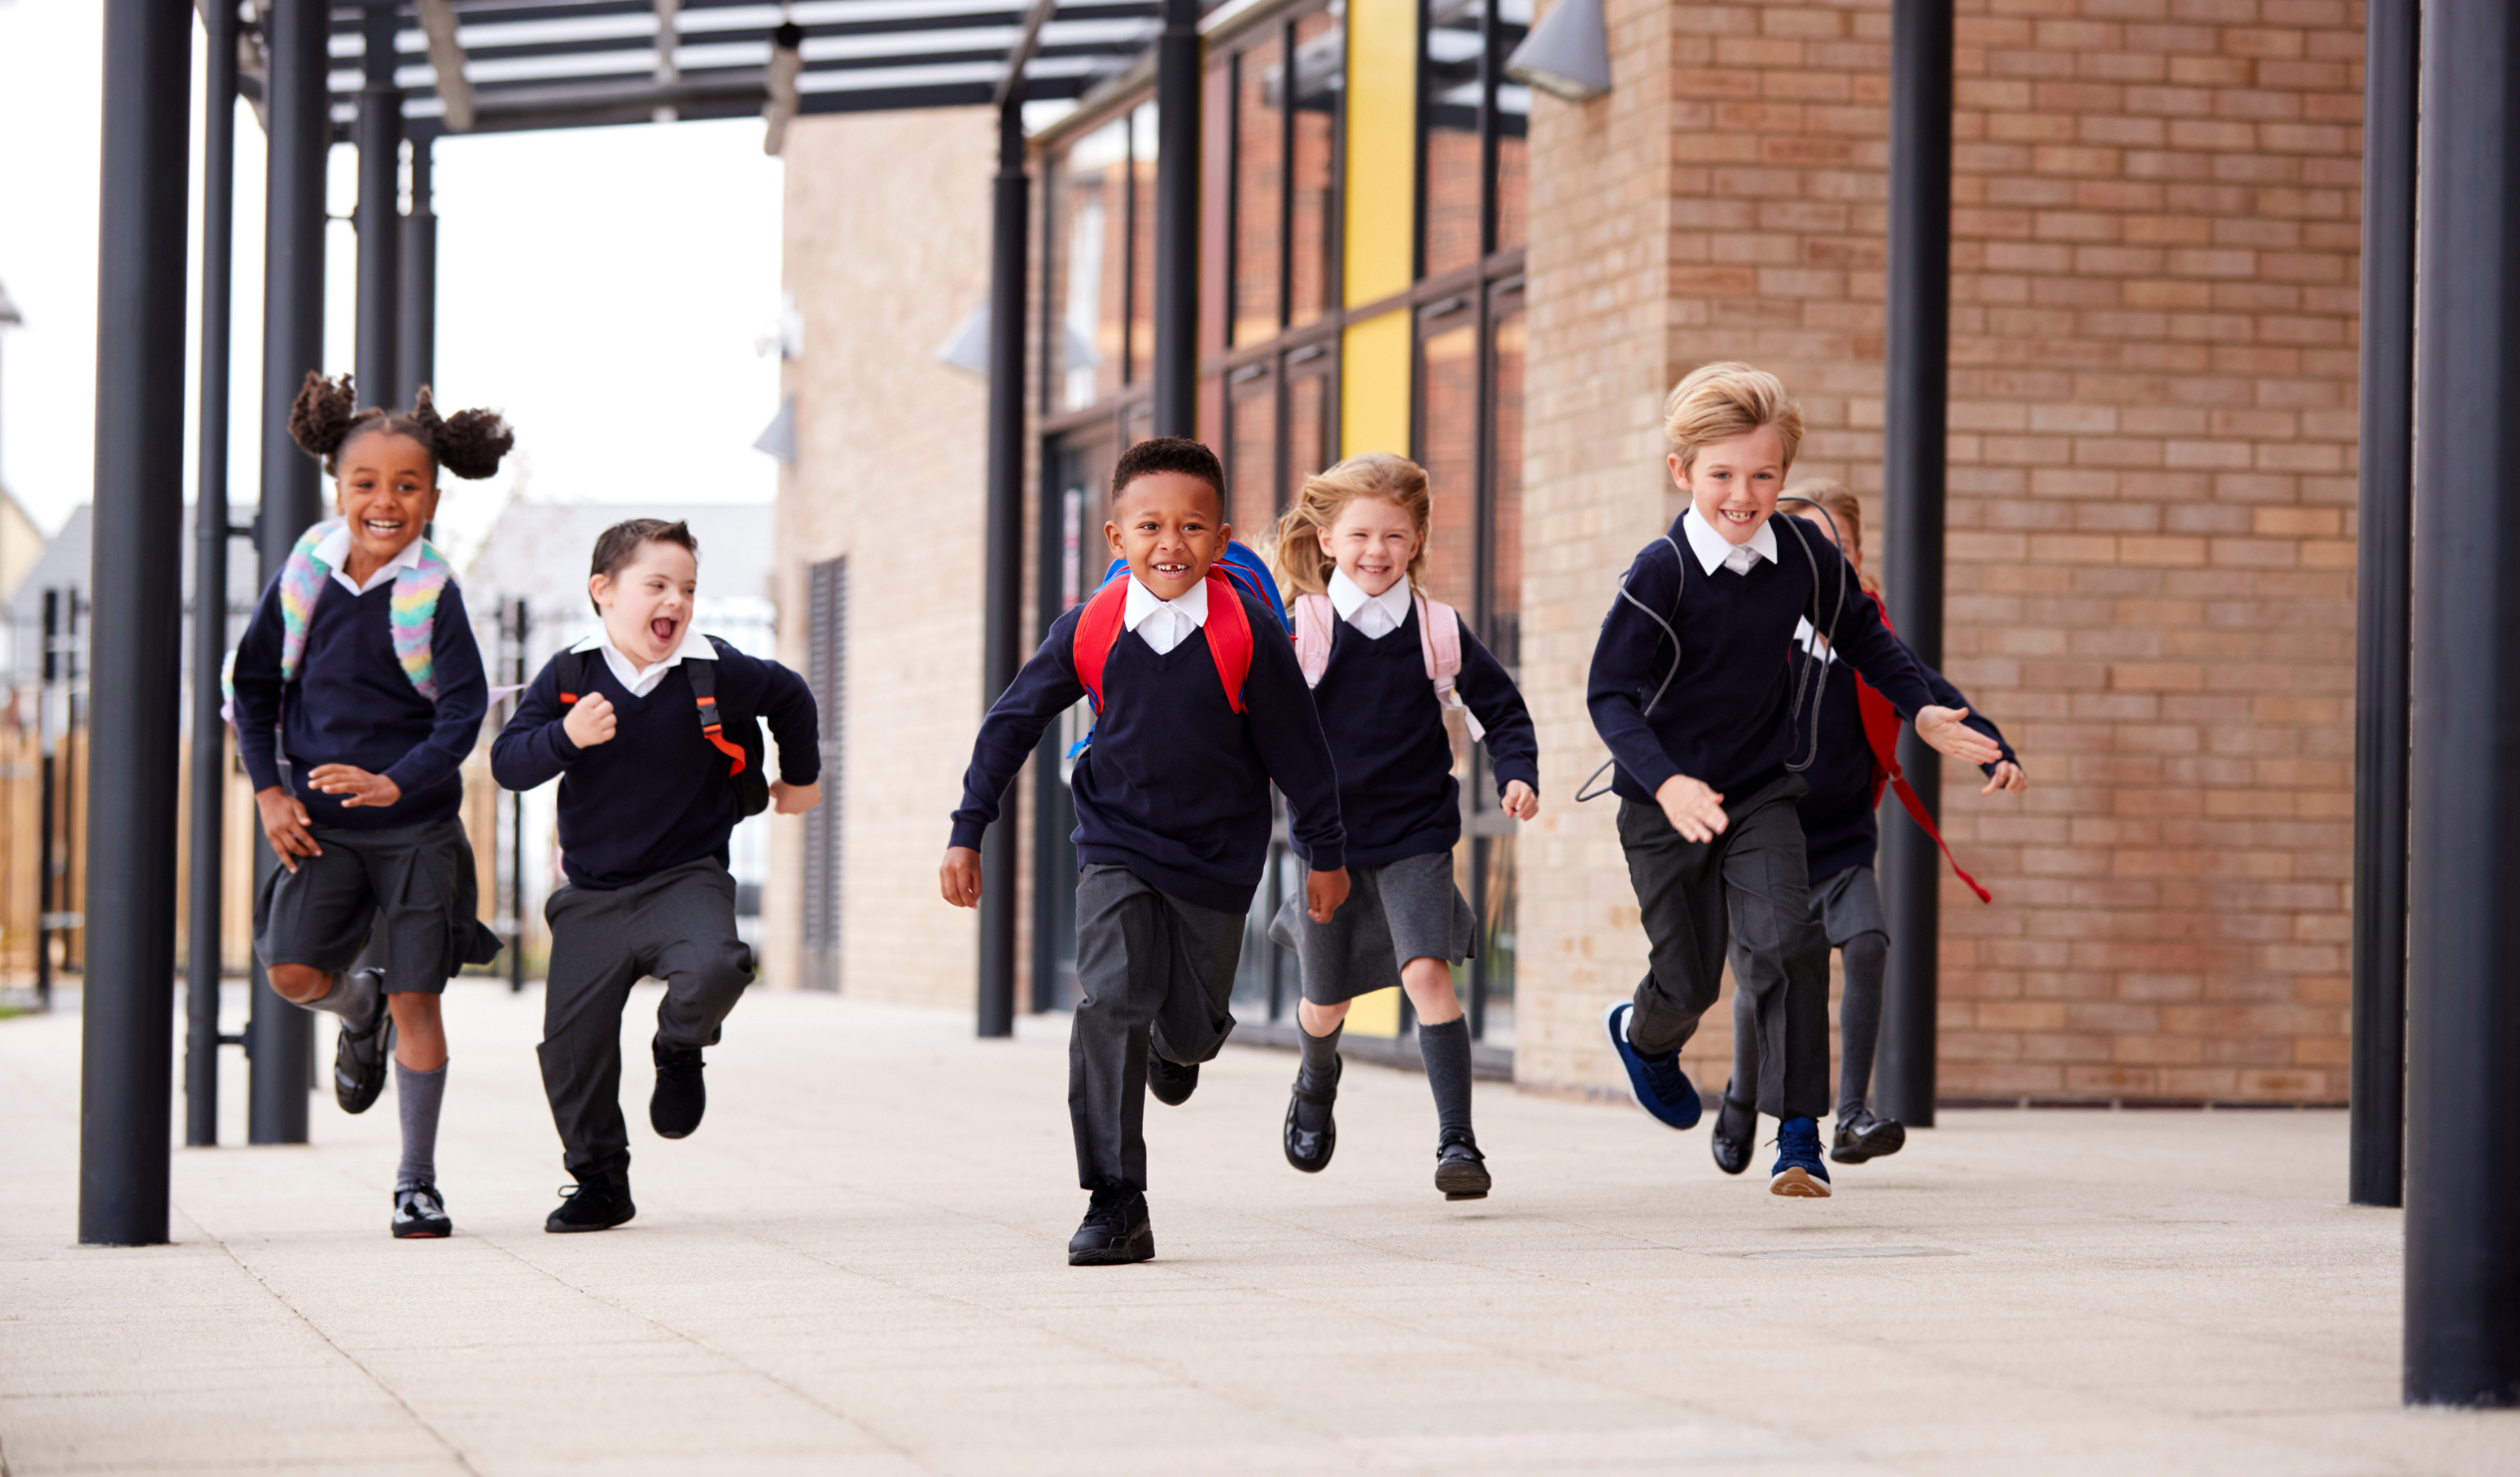 A group of diverse elementary students running excitedly through a school hallway, smiles on their faces.